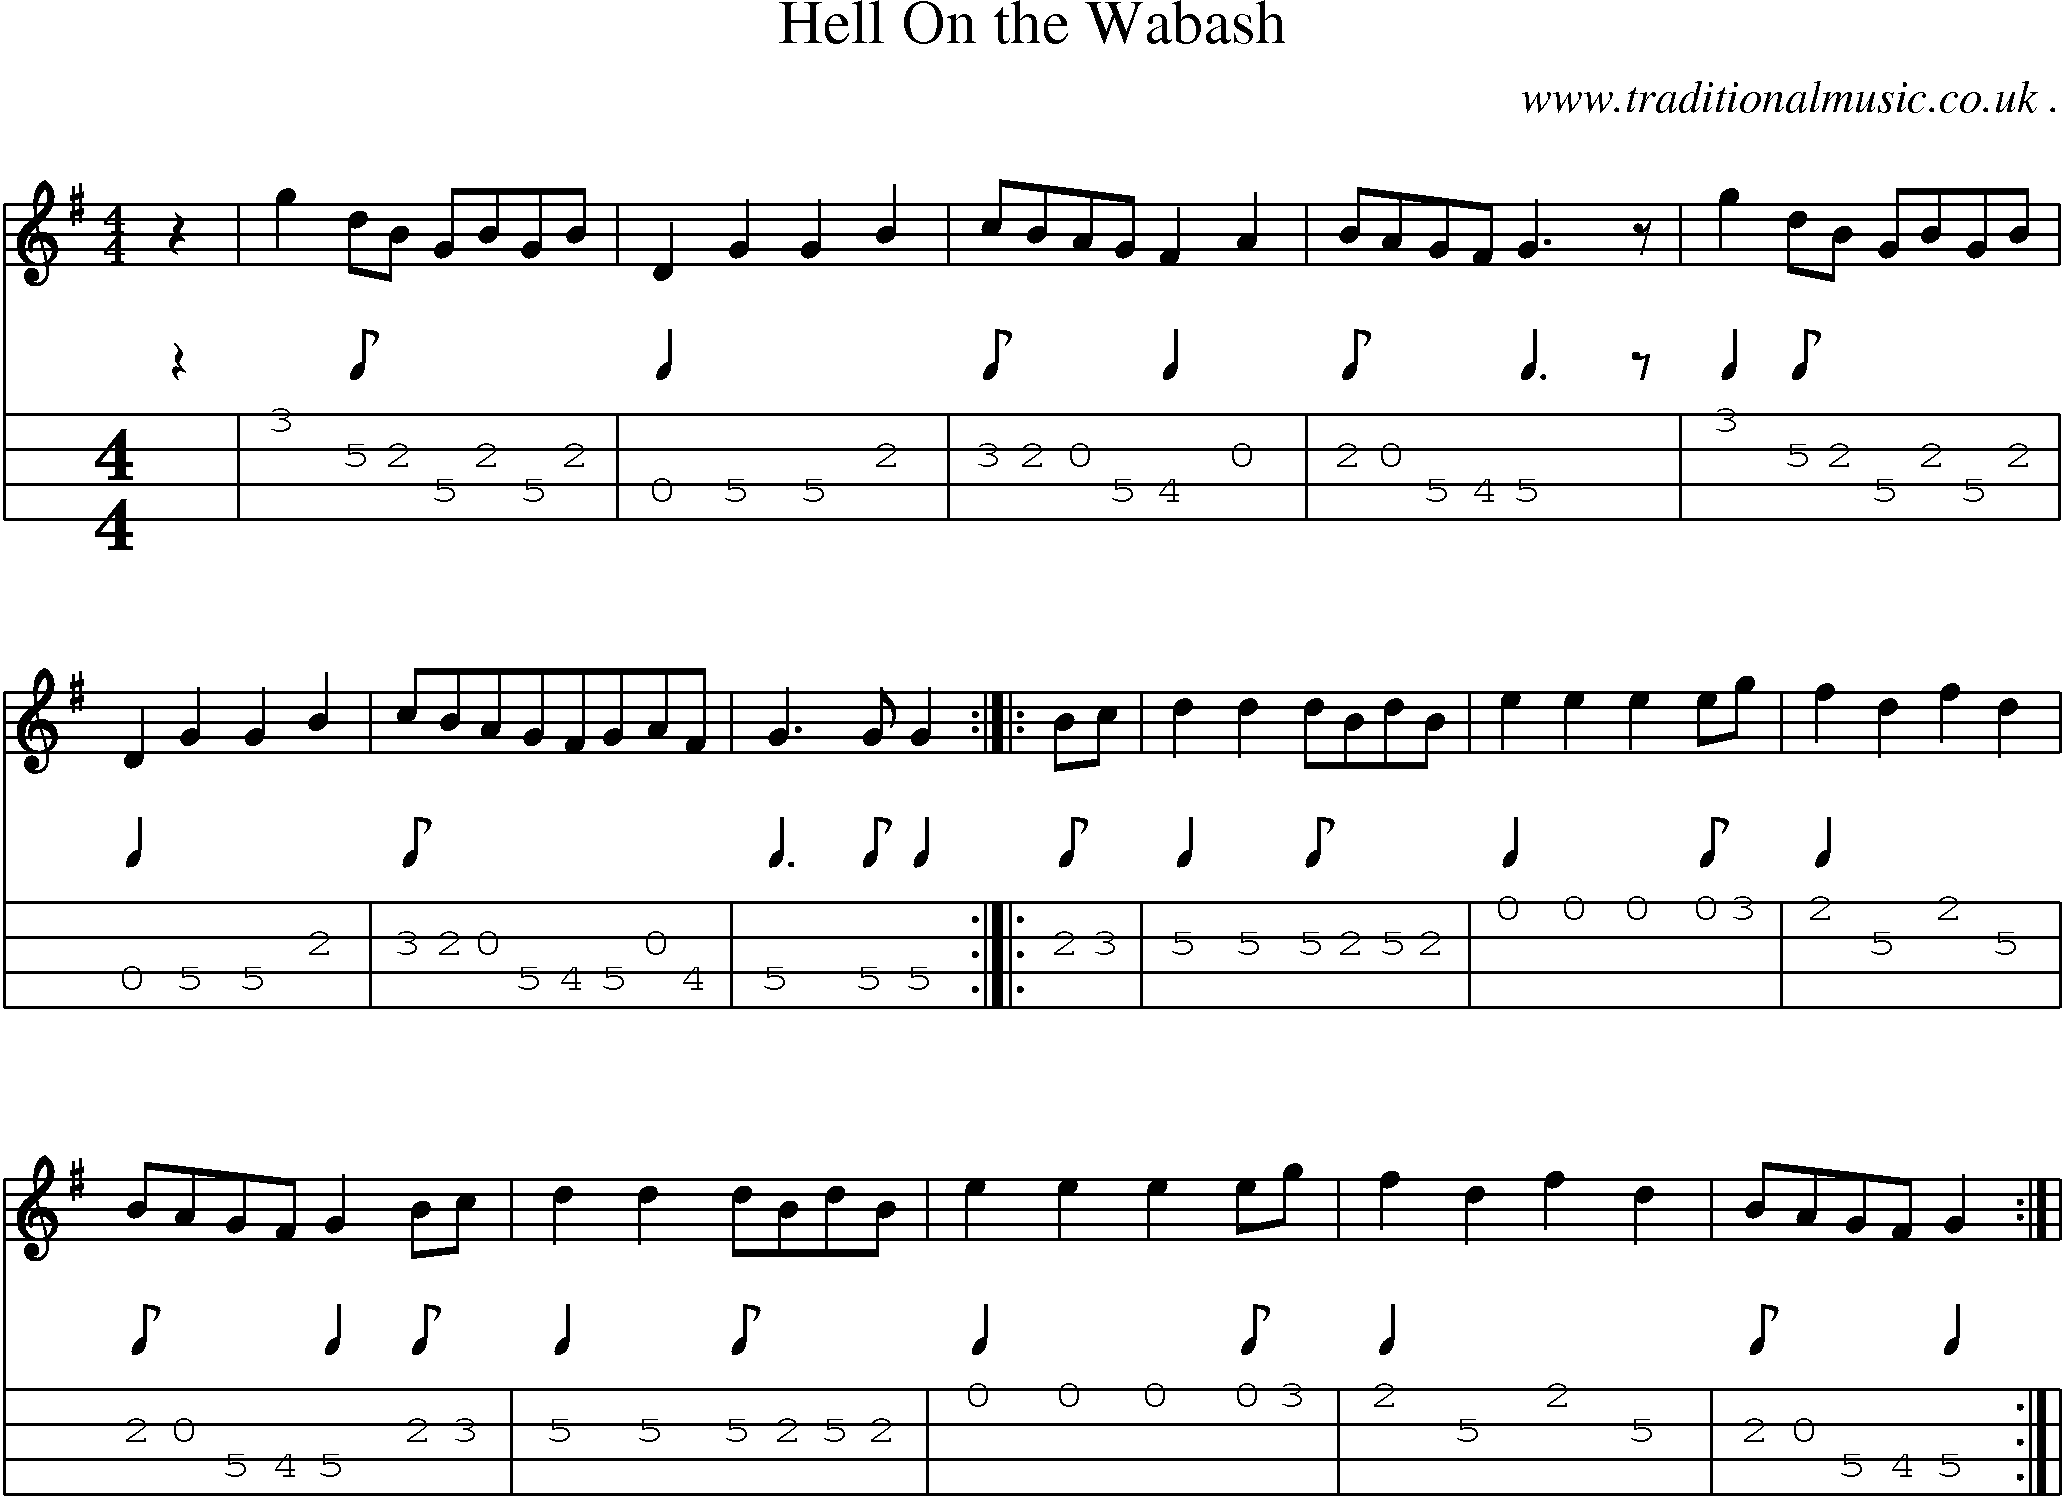 Music Score and Guitar Tabs for Hell On The Wabash